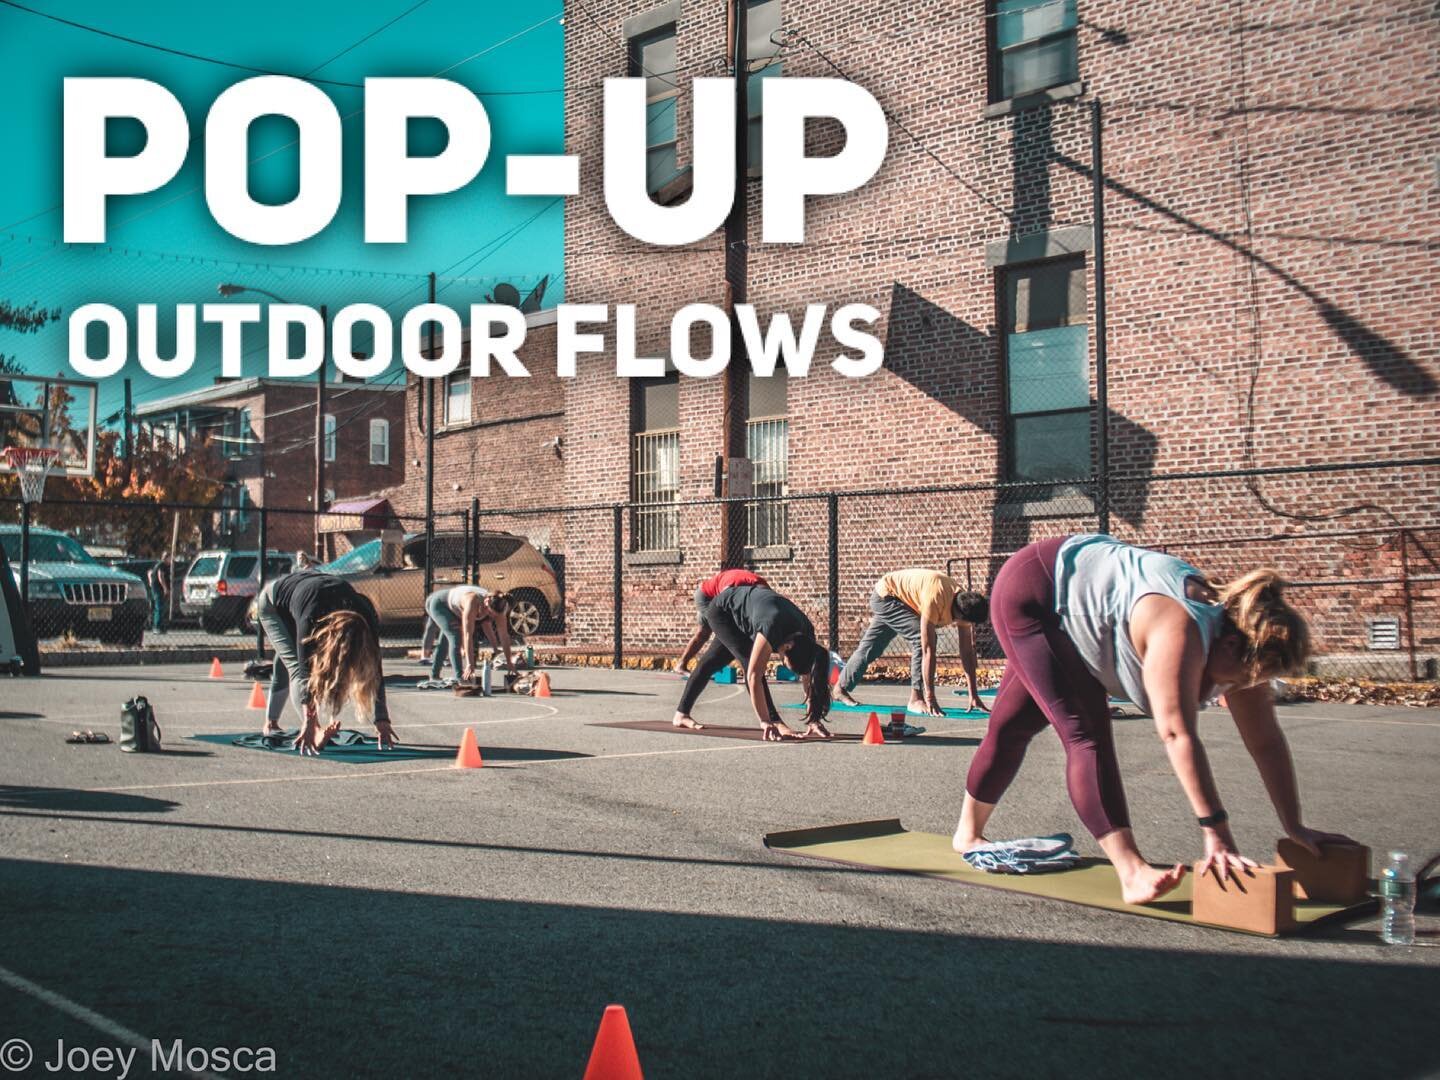 Alright, y’all. We are doing this! ? . Pop-Up Outdoor Flows! This Saturday & Sunday at 1pm! . The weather will be in the high 50s with real feel in the mid 60s and full sun! We are SO excited! . Sign-up at the link in our profile! . Our outdoor classes are held on the basketball court right next to our studio. You can park in the school lot across the street! . . . PLEASE READ - IMPORTANT DETAILS:?????????????????? 1. Pre-registration is REQUIRED & closes one hour before class starts. Space is limited. 2. Sign-up at that link in our profile. 3. $16/class or use your current in-person class package. 4. Upon arrival, set up your mat behind a cone. Cones will be 6ft apart. 5. Masks are required upon entering & exiting. They are optional during class. 6. Bring your own mat, props, towel & water. There will be no mats available for use. .????????? Questions? DM us or email kristen@theyogaground.com .????????? photo: @joey_mosca . . . #theyogaground #outdooryoga #yoga